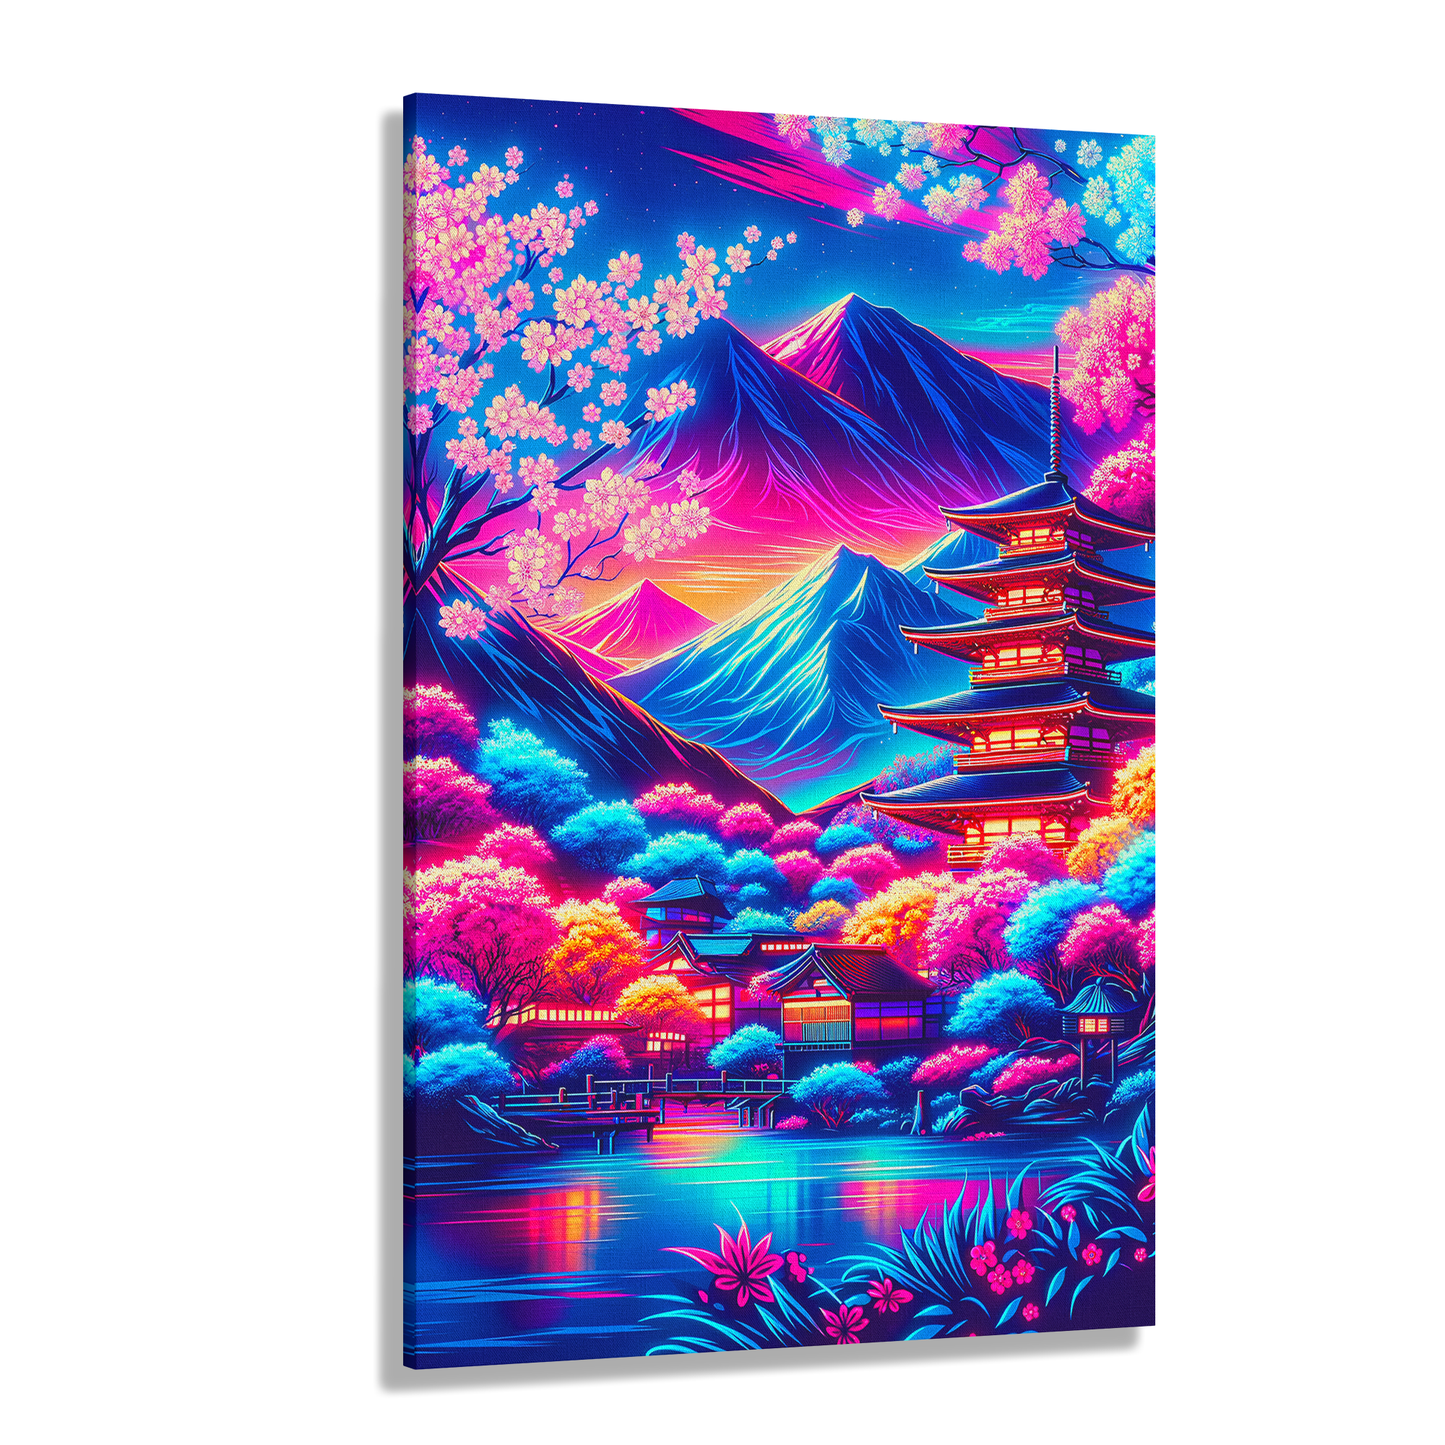 Neon Blossom Dreams (Canvas)Neon Blossom Dreams (Canvas  Matte finish, stretched, with a depth of 1.25 inches)
Struggling with low-quality canvases? Switch to RimaGallery! Our canvases are moreRimaGallery